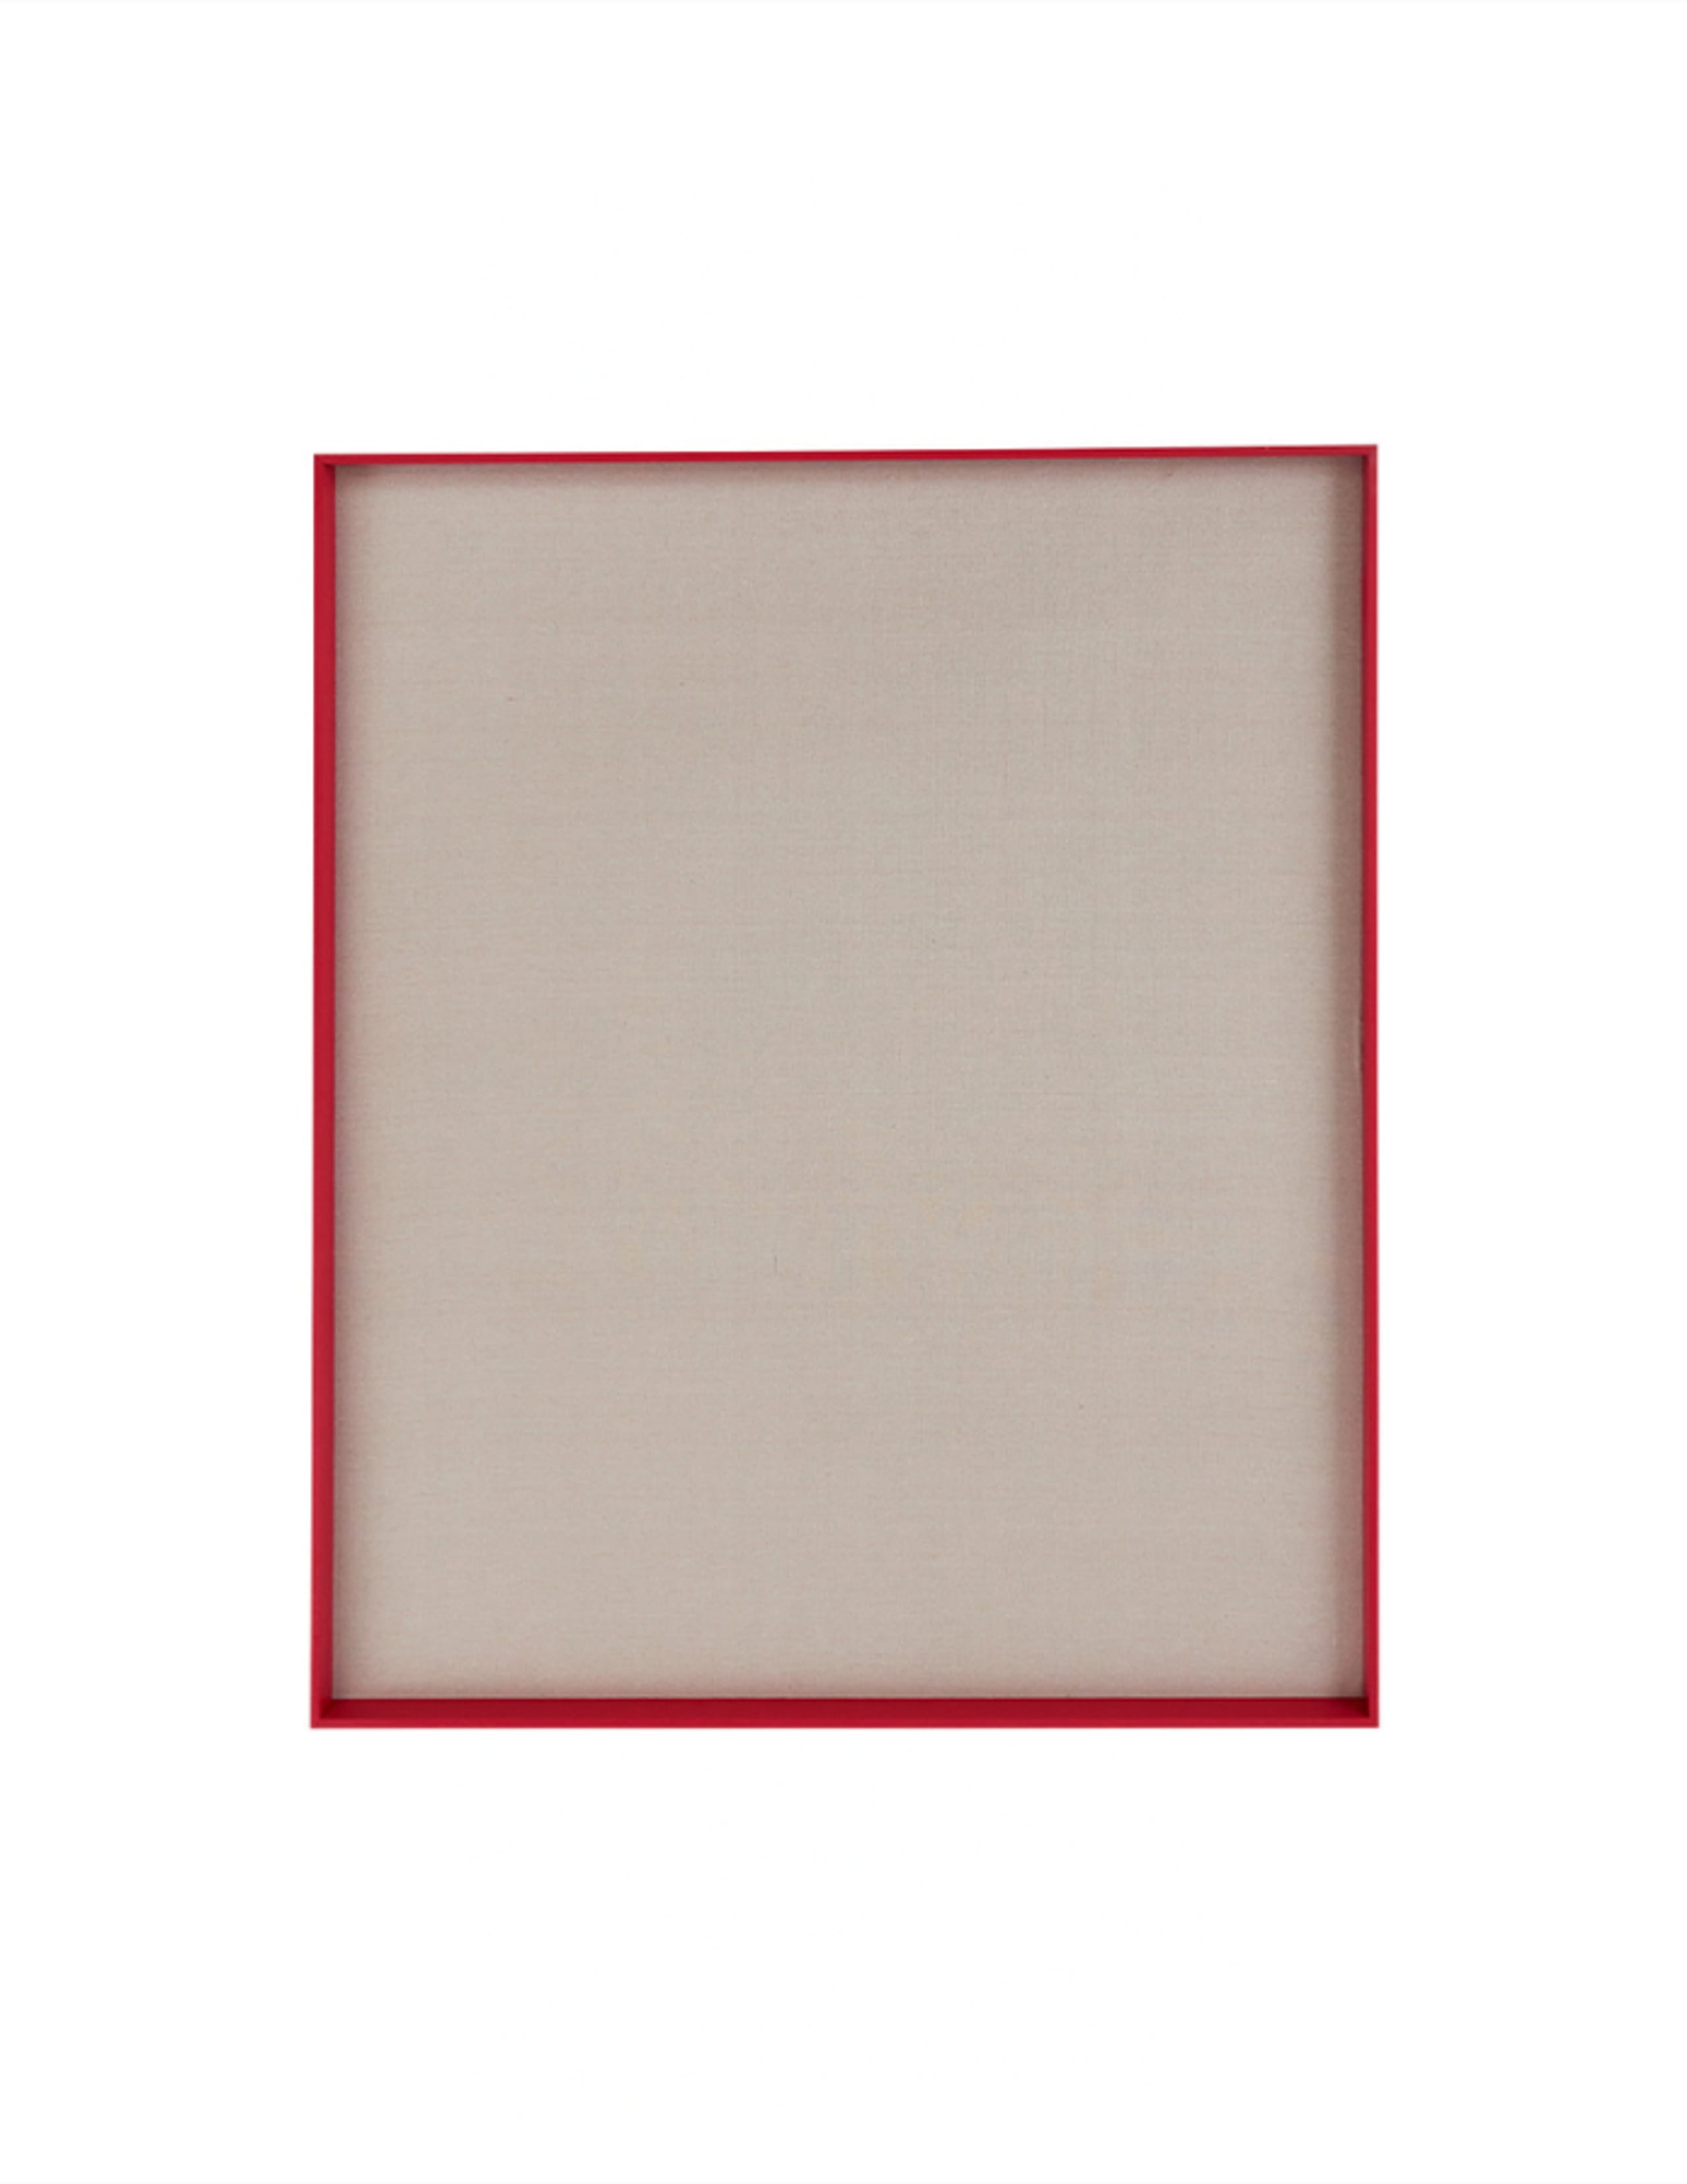 OYOY LIVING - Tray - Peili Notice Board  - 405 Red - Large